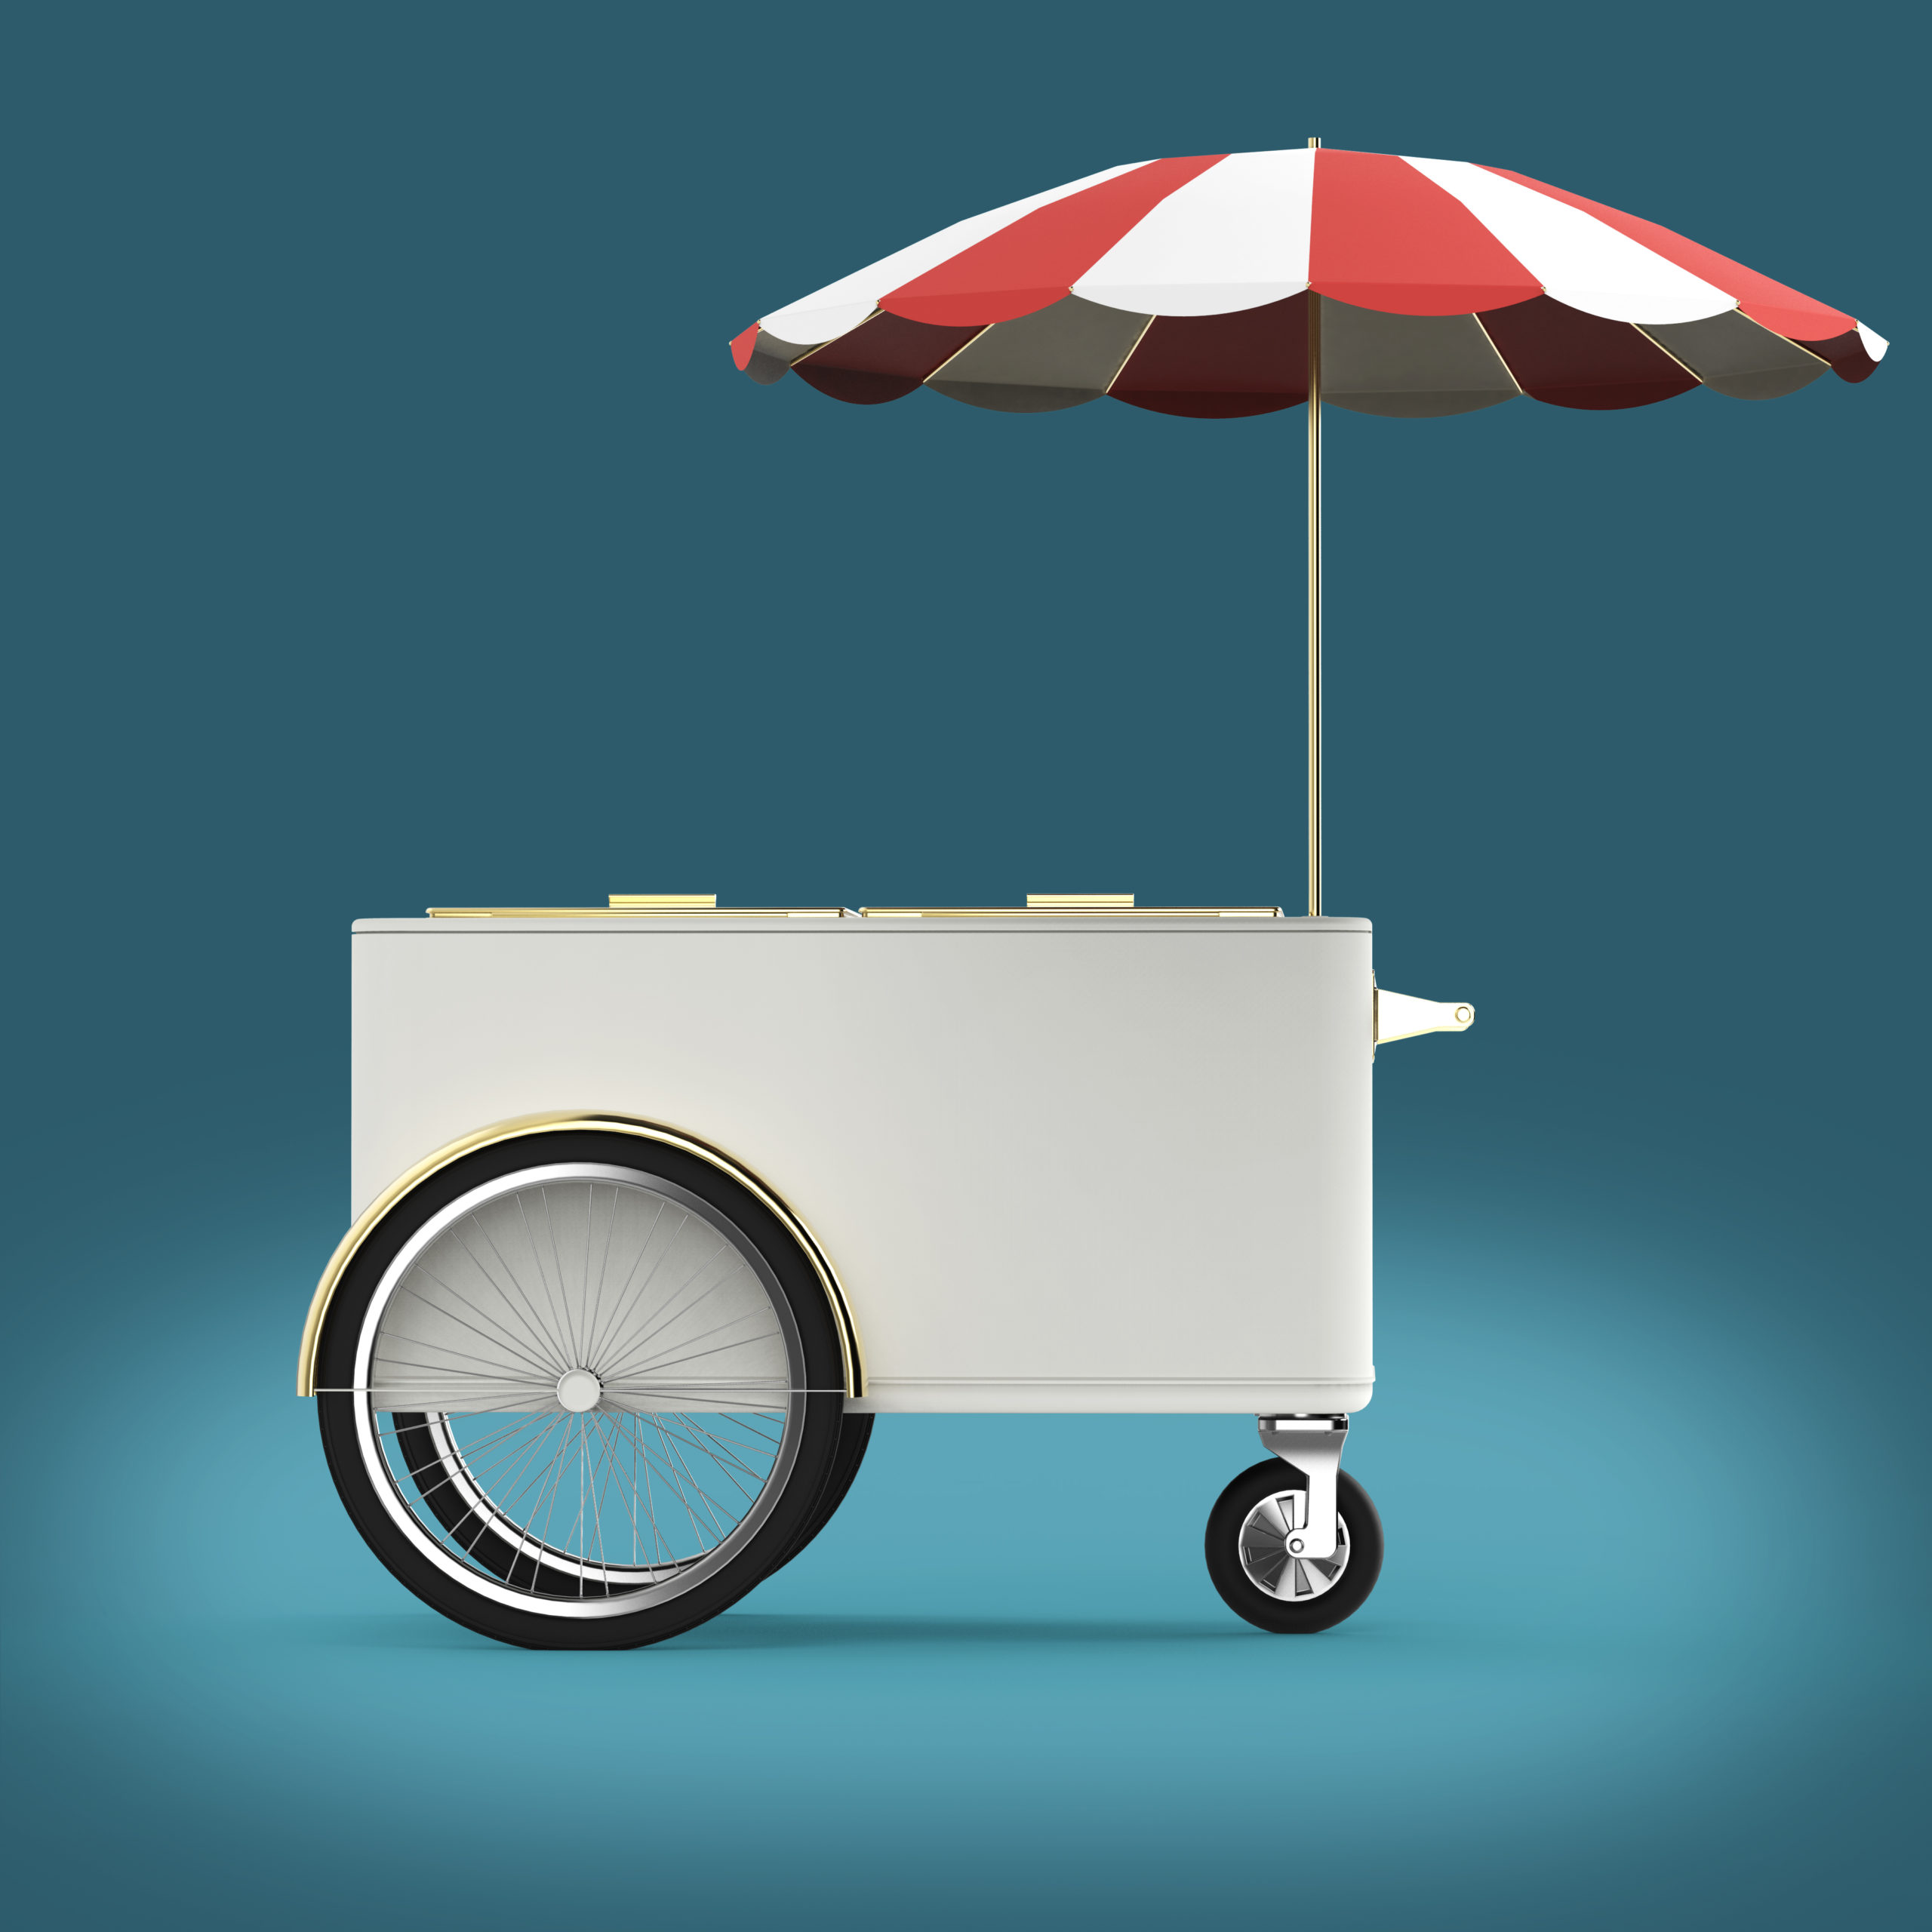 Ice cream cart with a red and white umbrella, set against a blue background